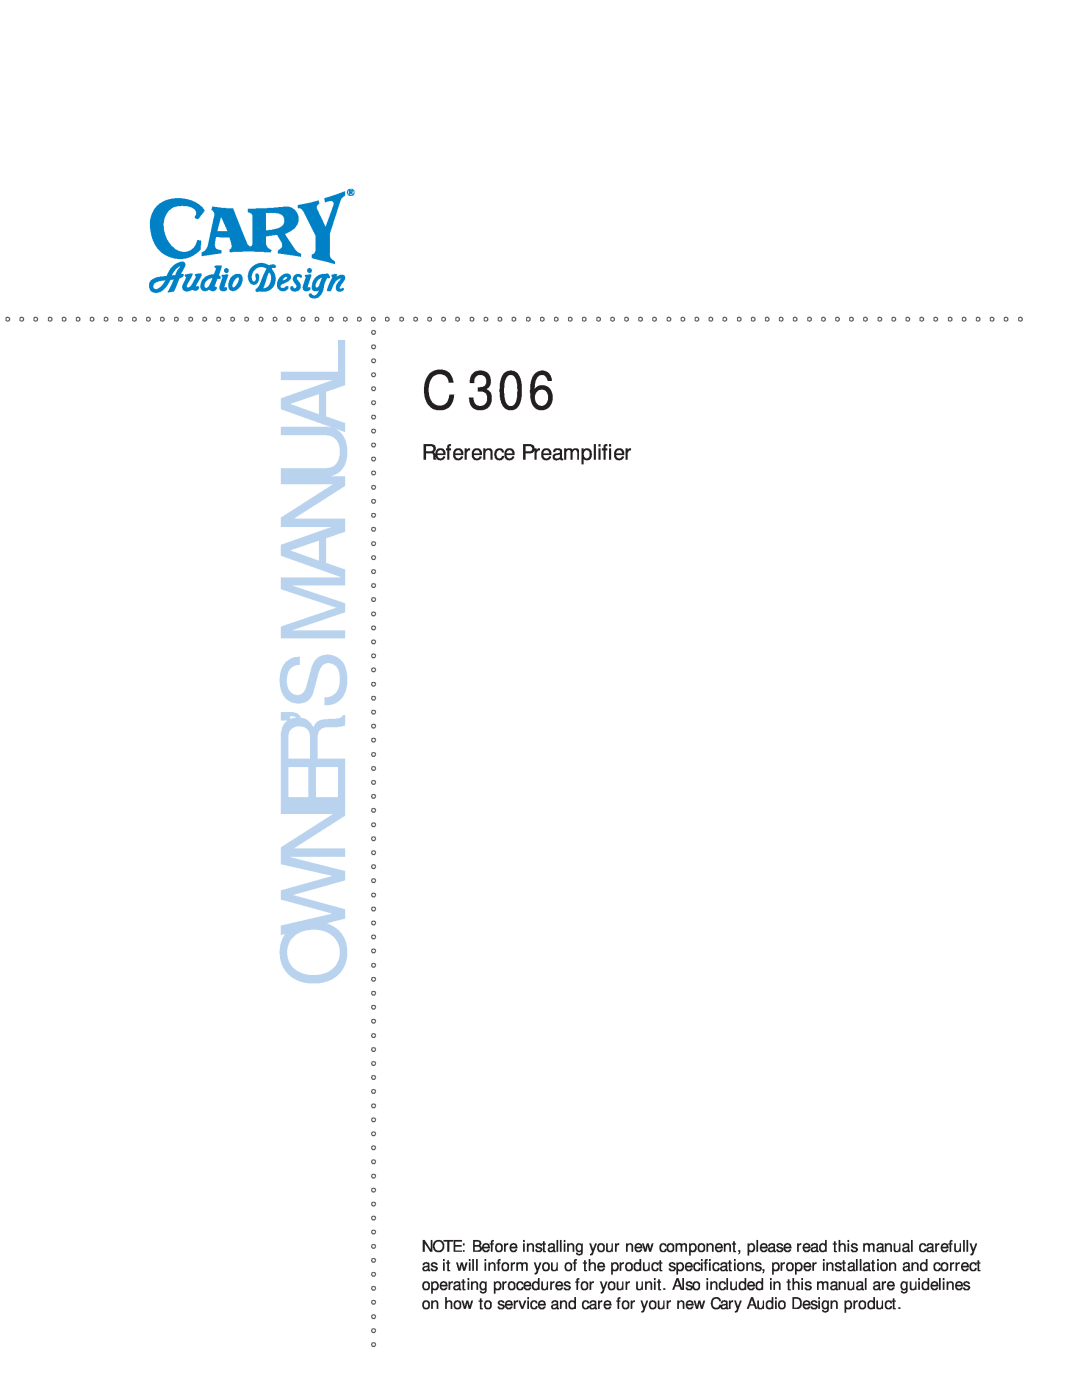 Cary Audio Design C 306 owner manual Reference Preampliﬁer 